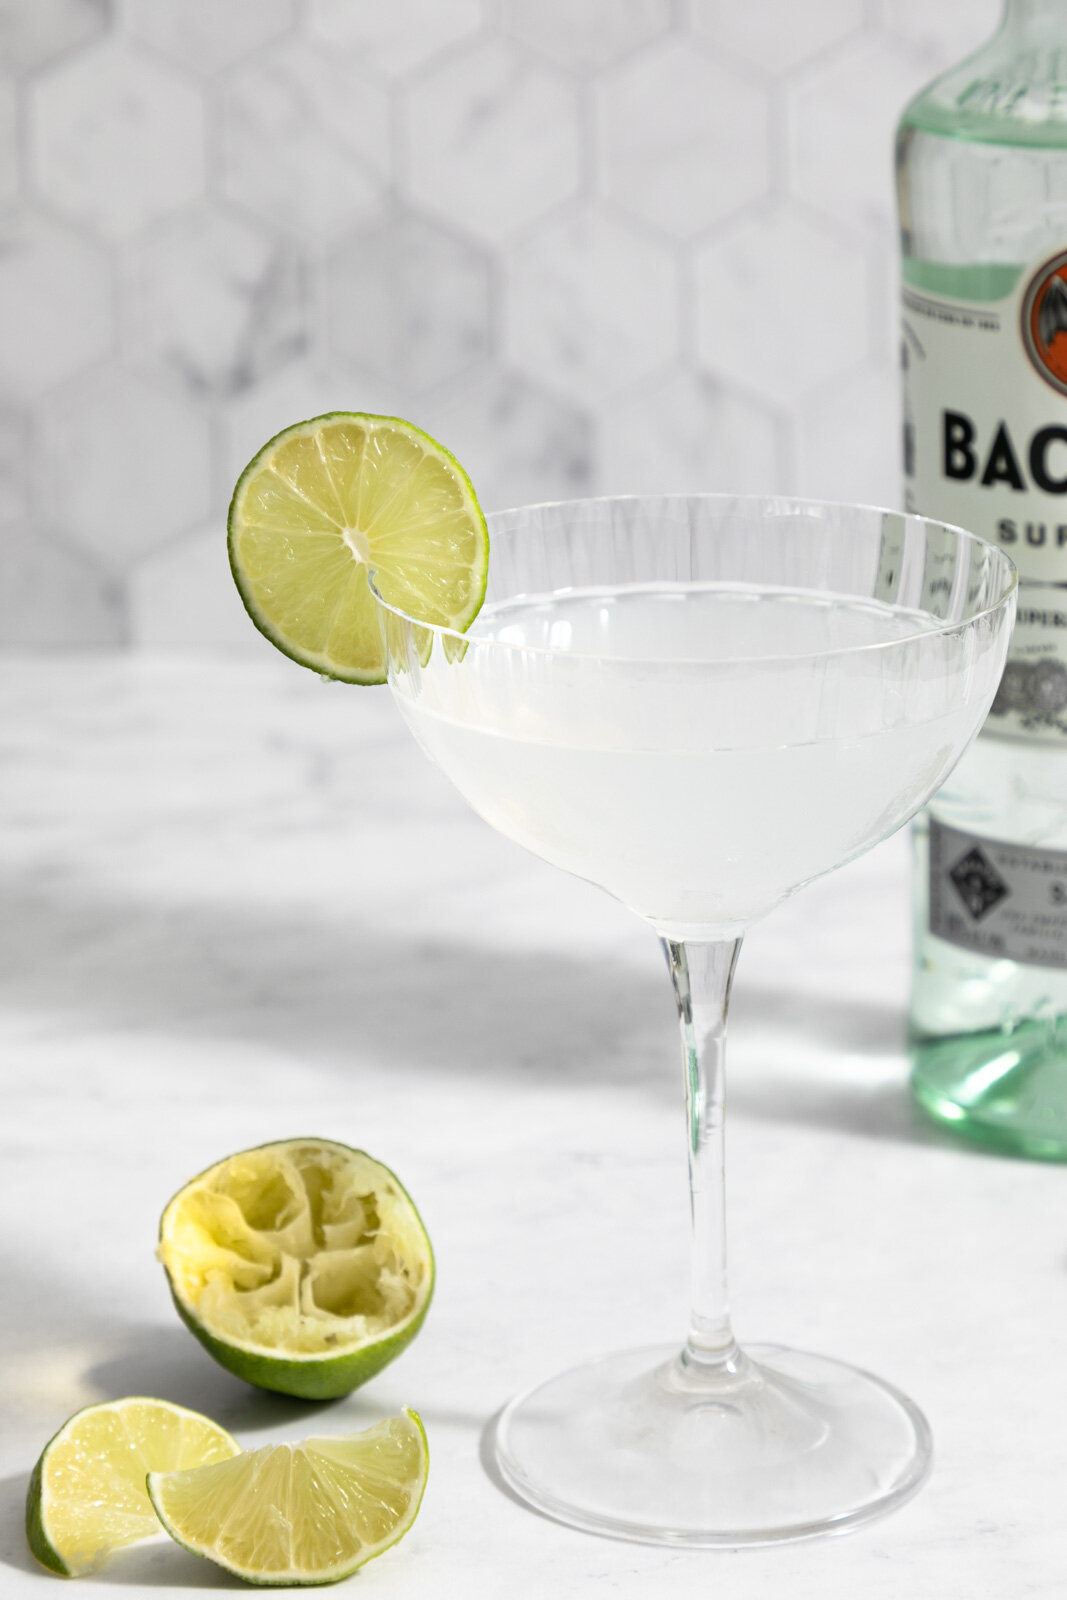 Lime Daiquiri - a simply refreshing lime and rum drink